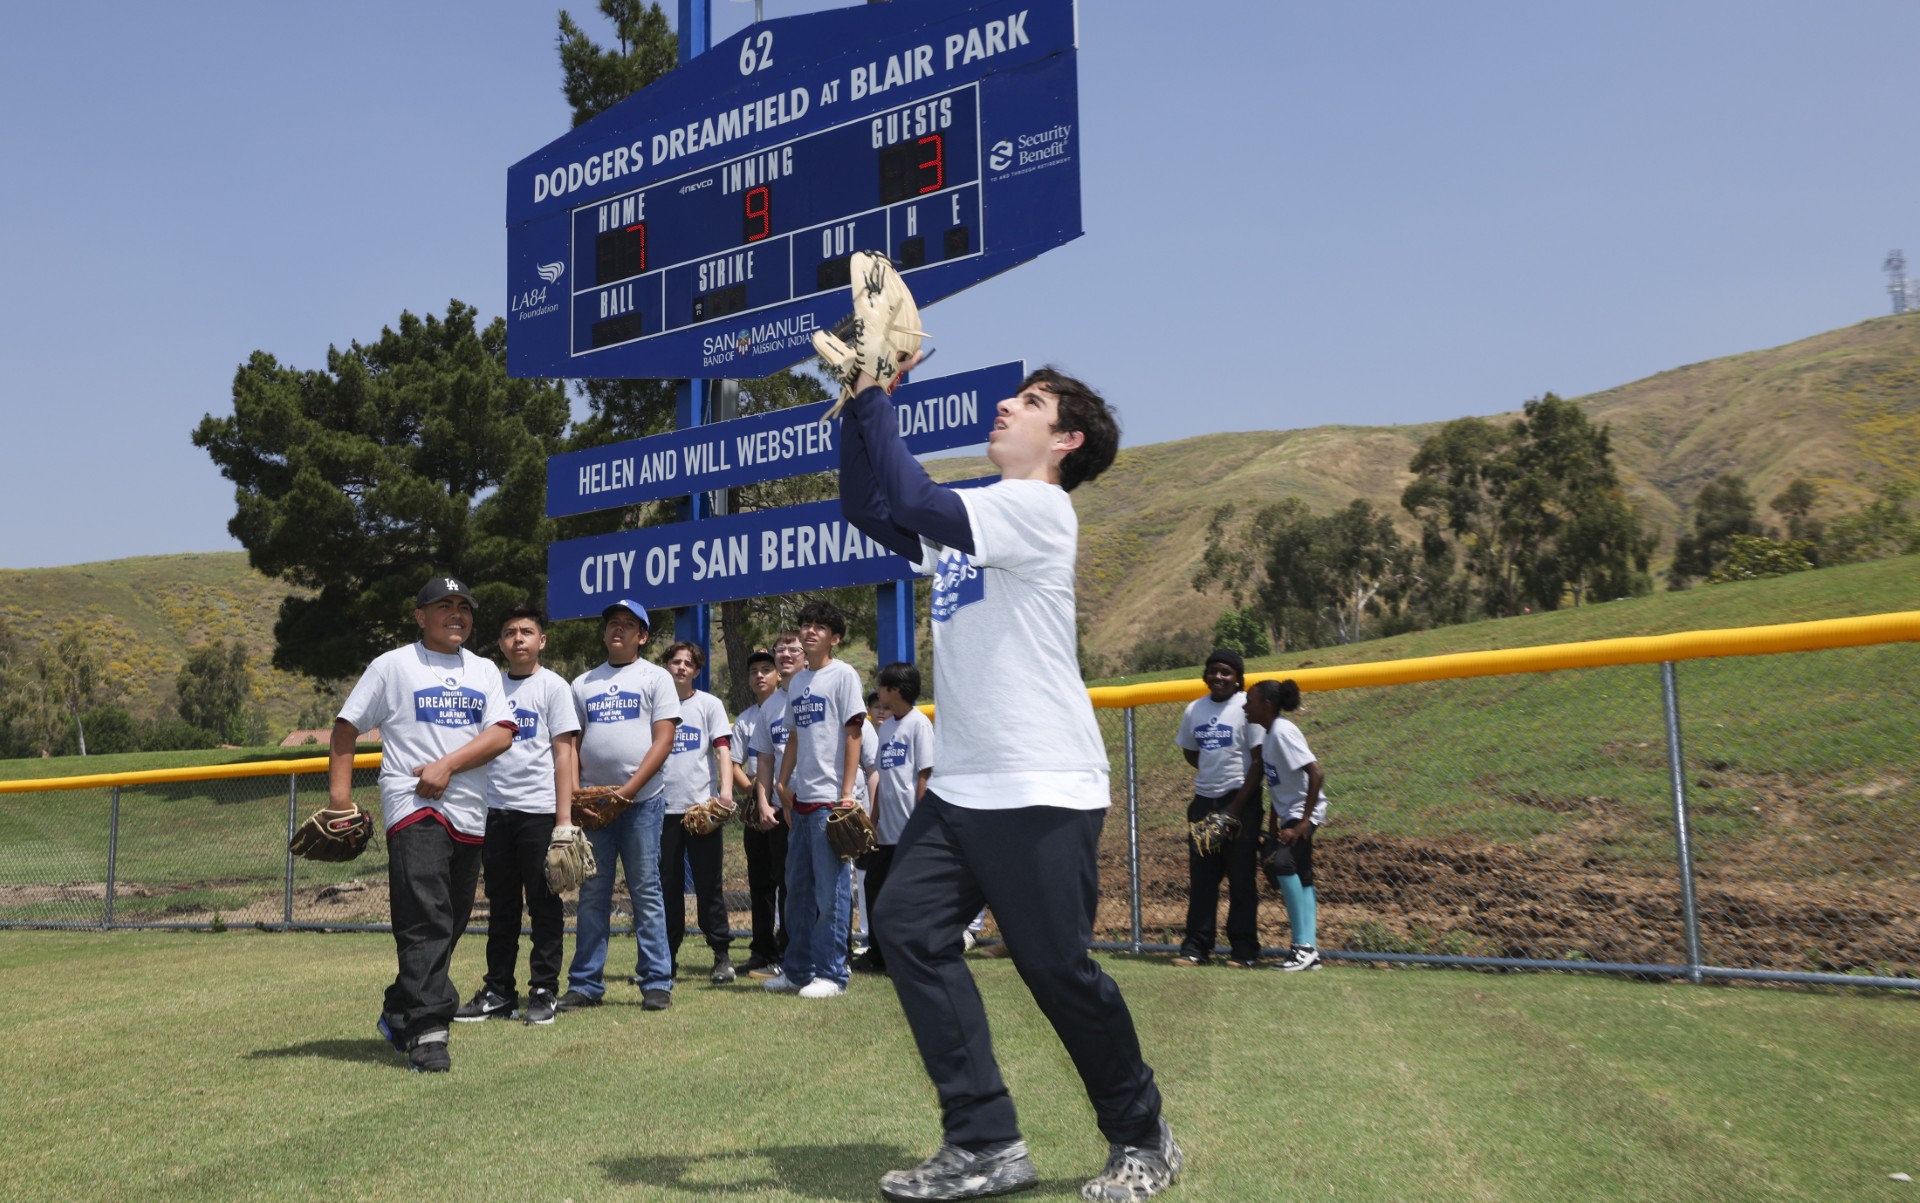 Youth play on Dodgers Dreamfield 